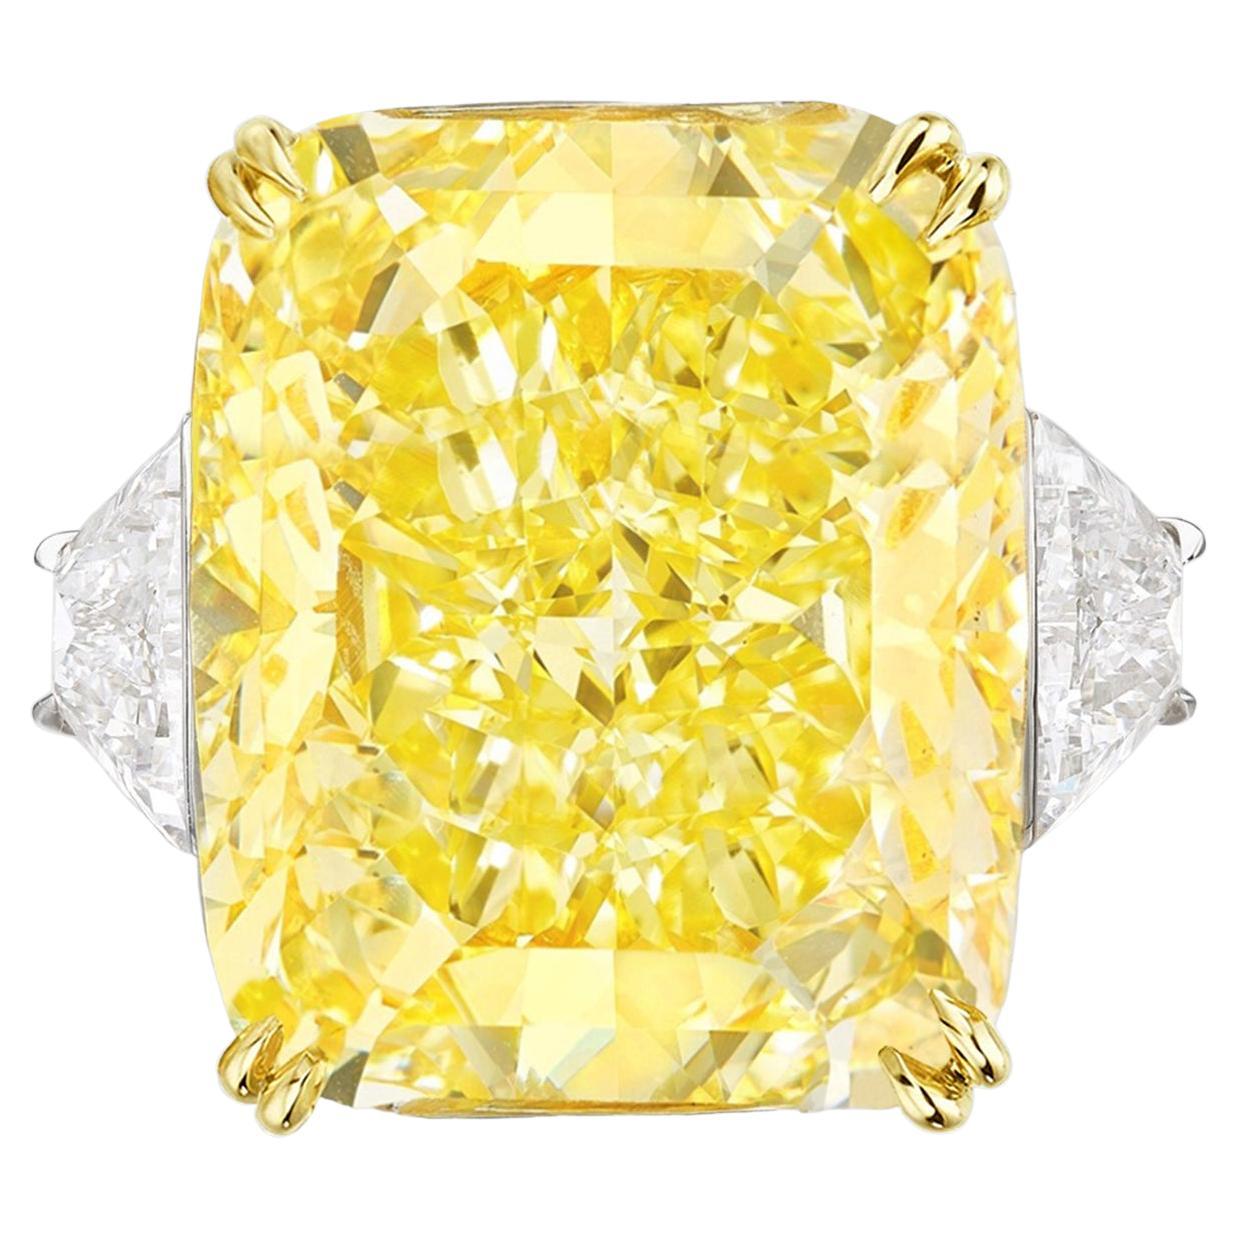 Radiate unparalleled elegance with this GIA Certified 10.19 Carat Fancy Intense Yellow Cushion Cut Diamond Ring, adorned with trapezoid diamonds on the side. At the heart of this magnificent ring gleams a captivating cushion-cut diamond, certified